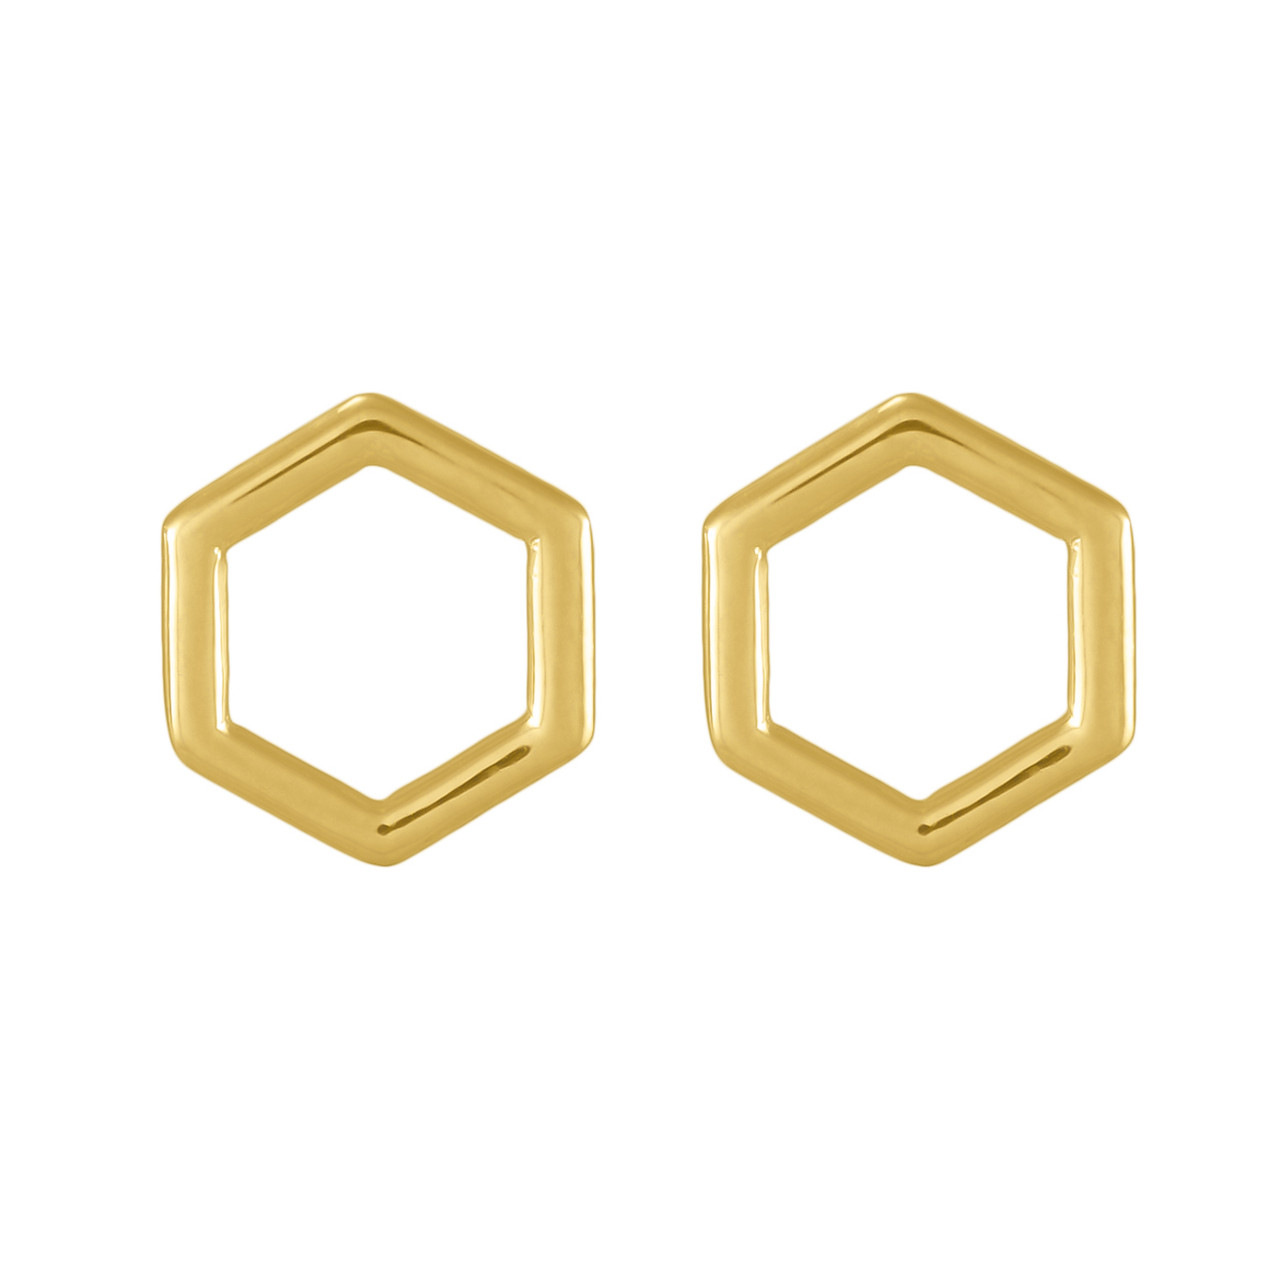 tomfoolery: Curve Hexagon Studs, Everyday by tomfoolery